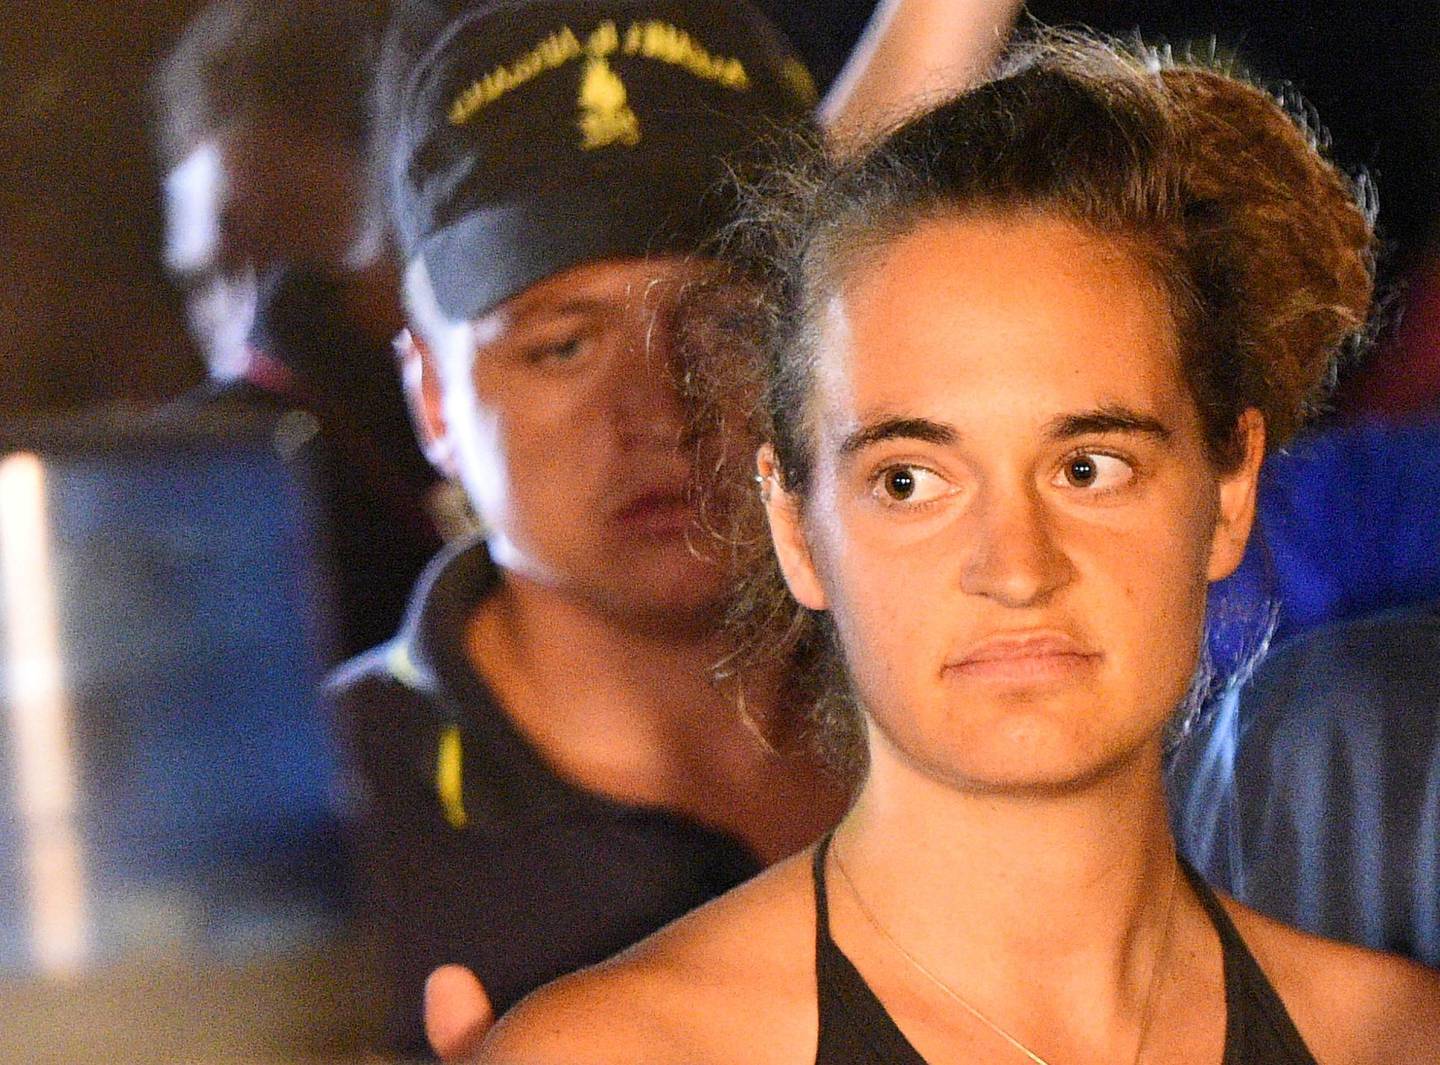 FILE PHOTO: Carola Rackete, 31-year-old Sea-Watch 3 captain, is escorted off the ship by police and taken away for questioning, in Lampedusa, Italy, June 29, 2019. REUTERS/Guglielmo Mangiapane/File Photo